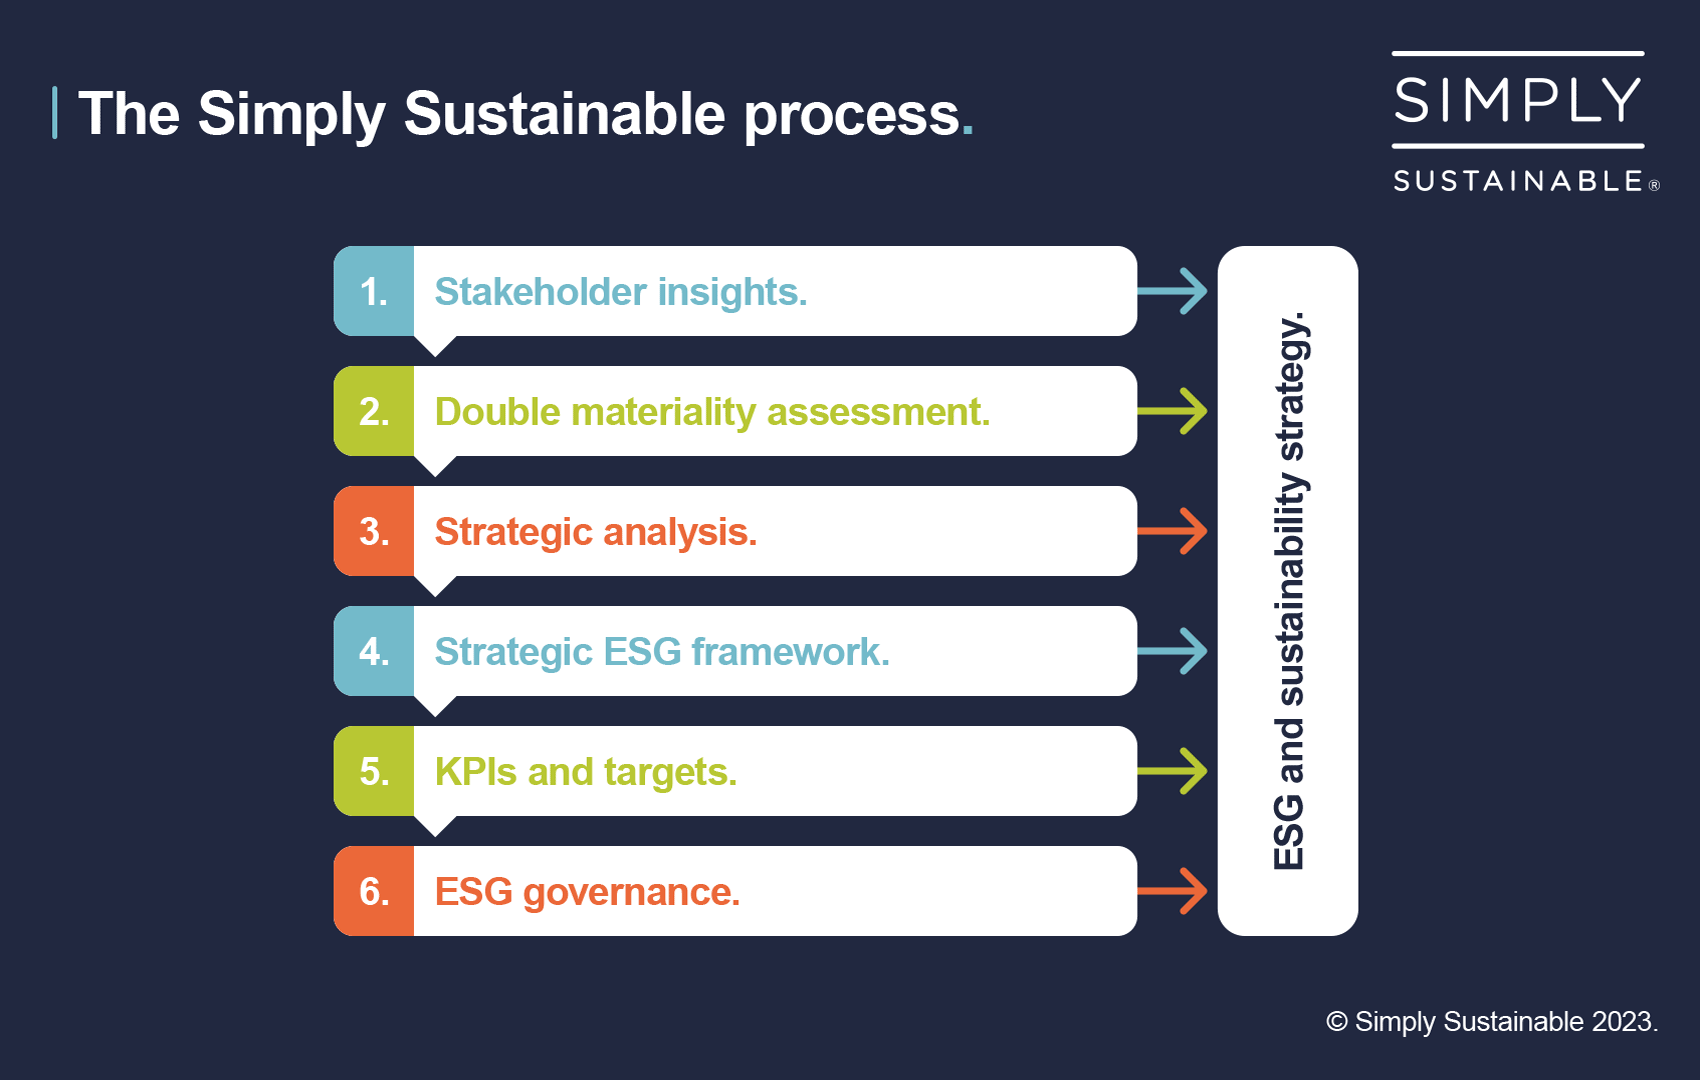 The Simply Sustainable process